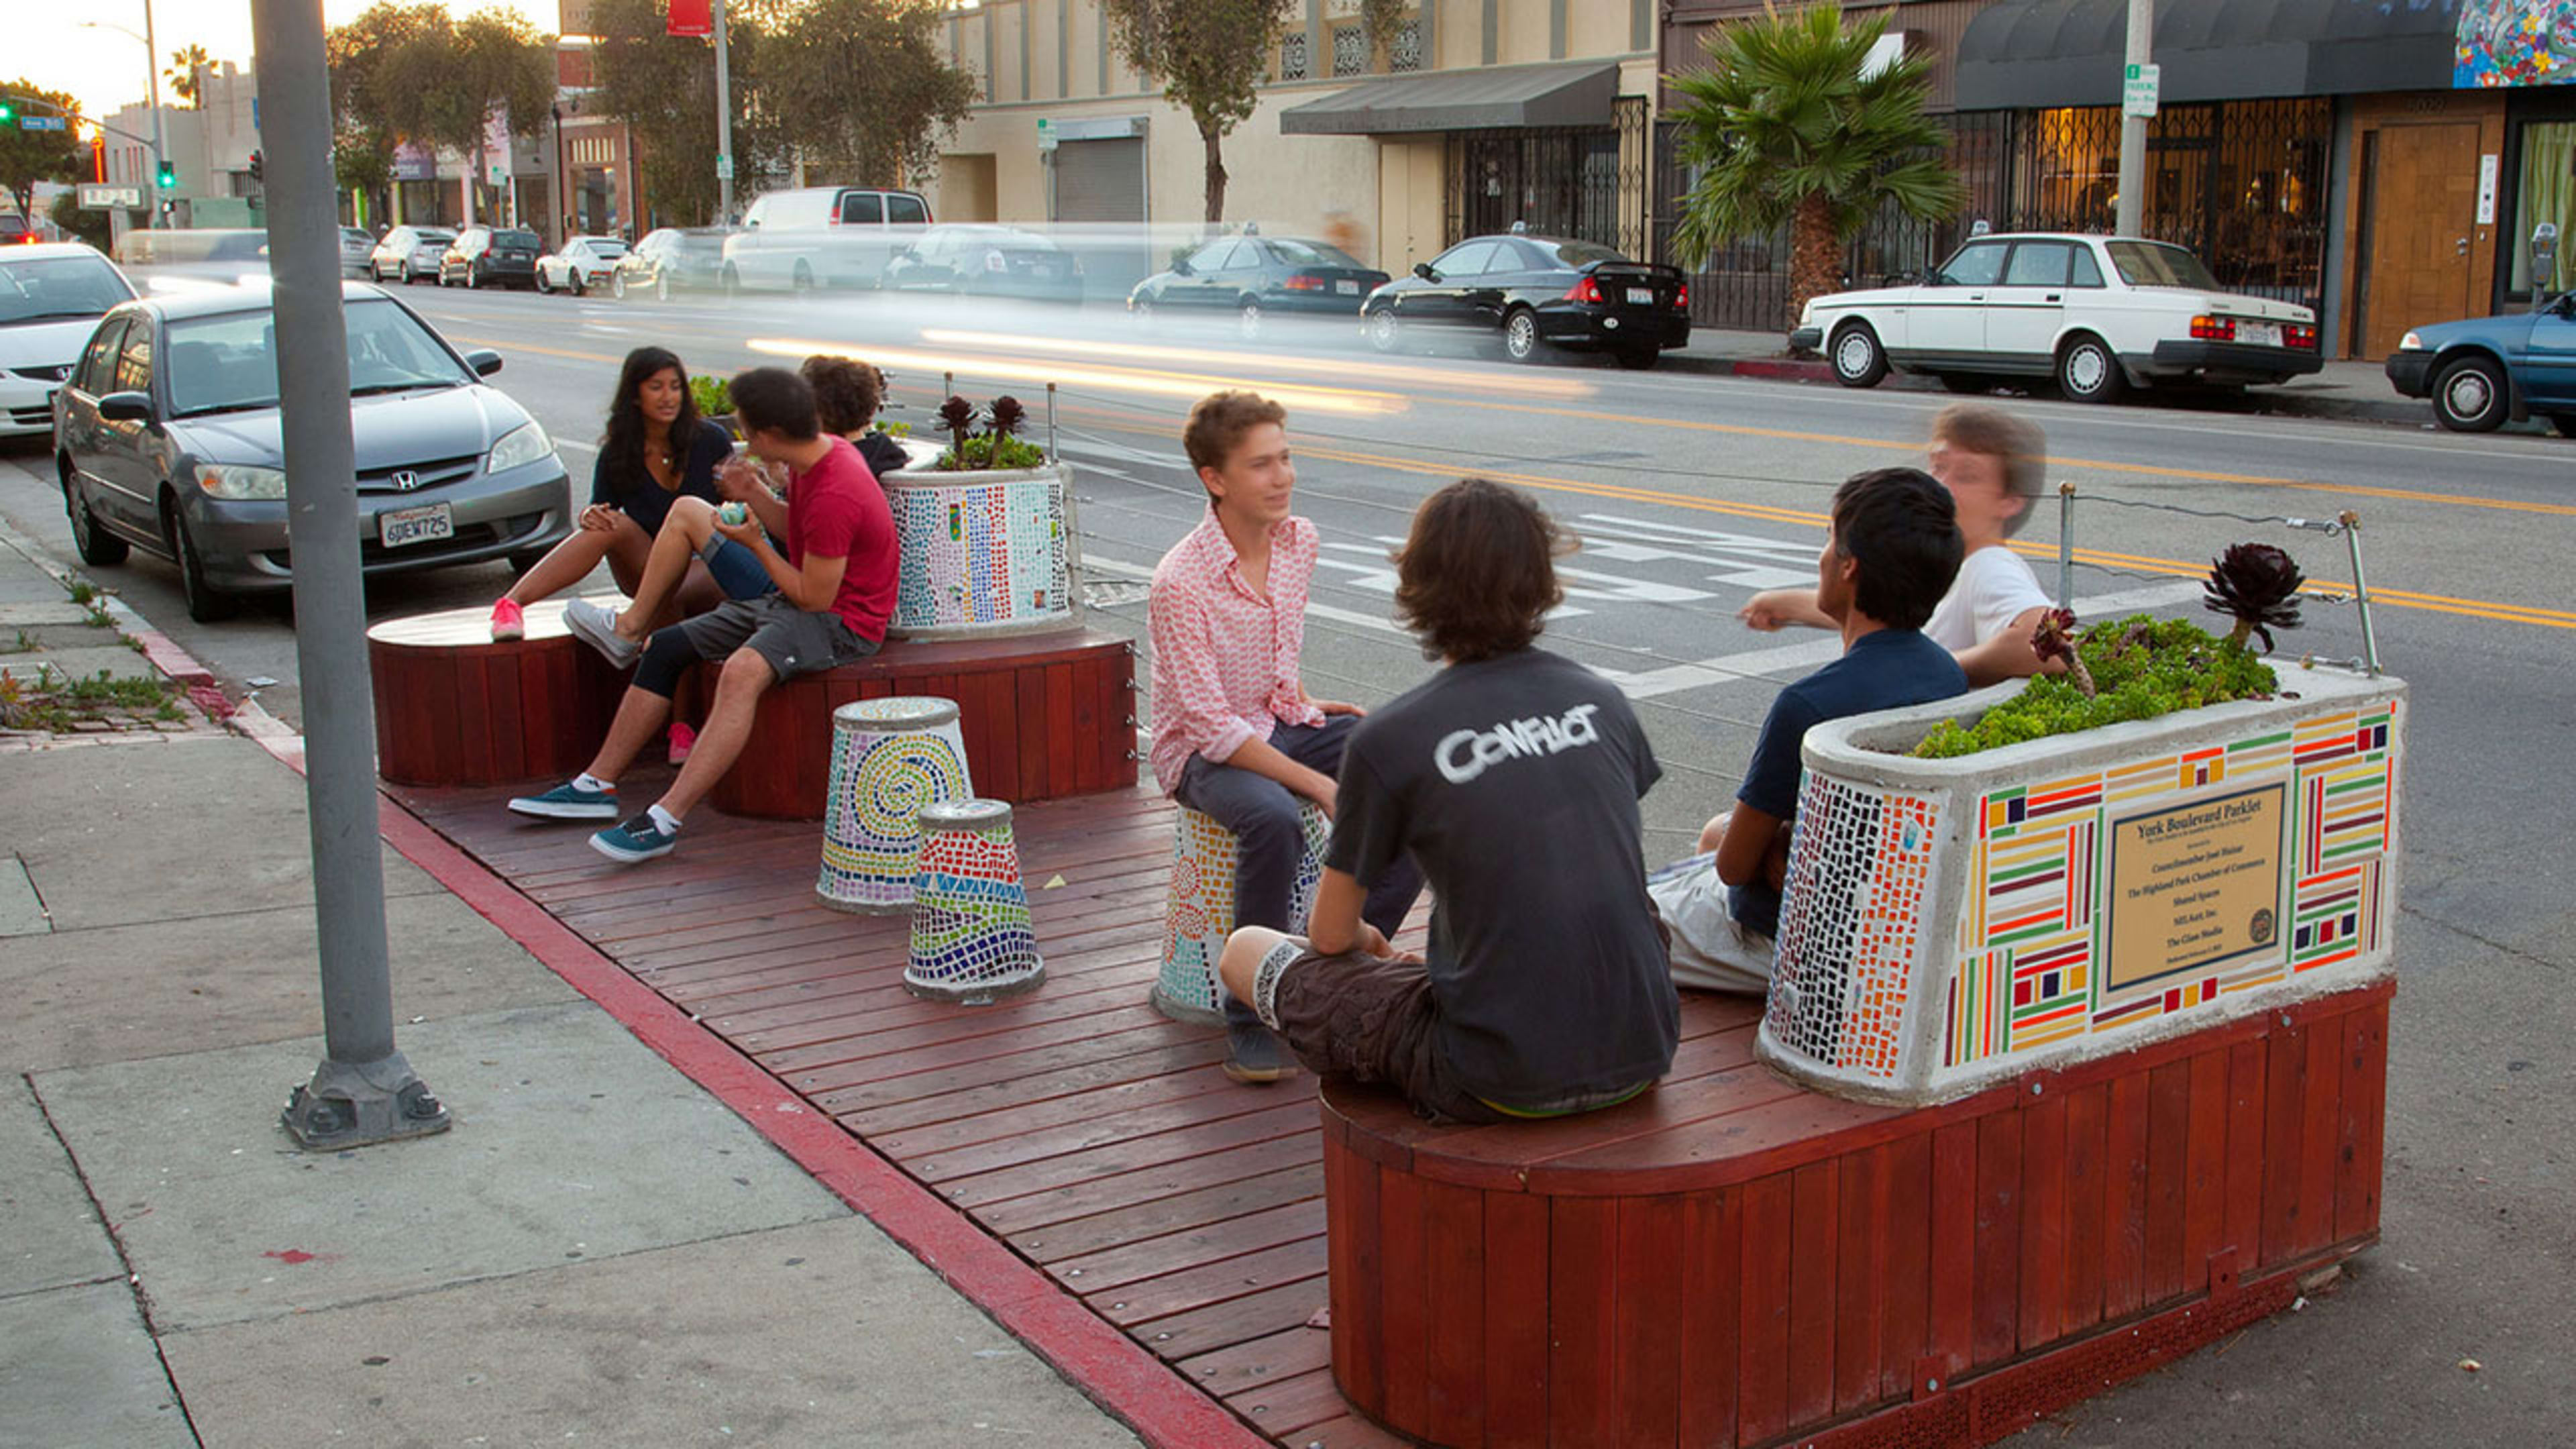 DIY Kits To Help Build Your Own Mini-Park Anywhere There Is Space On The Street